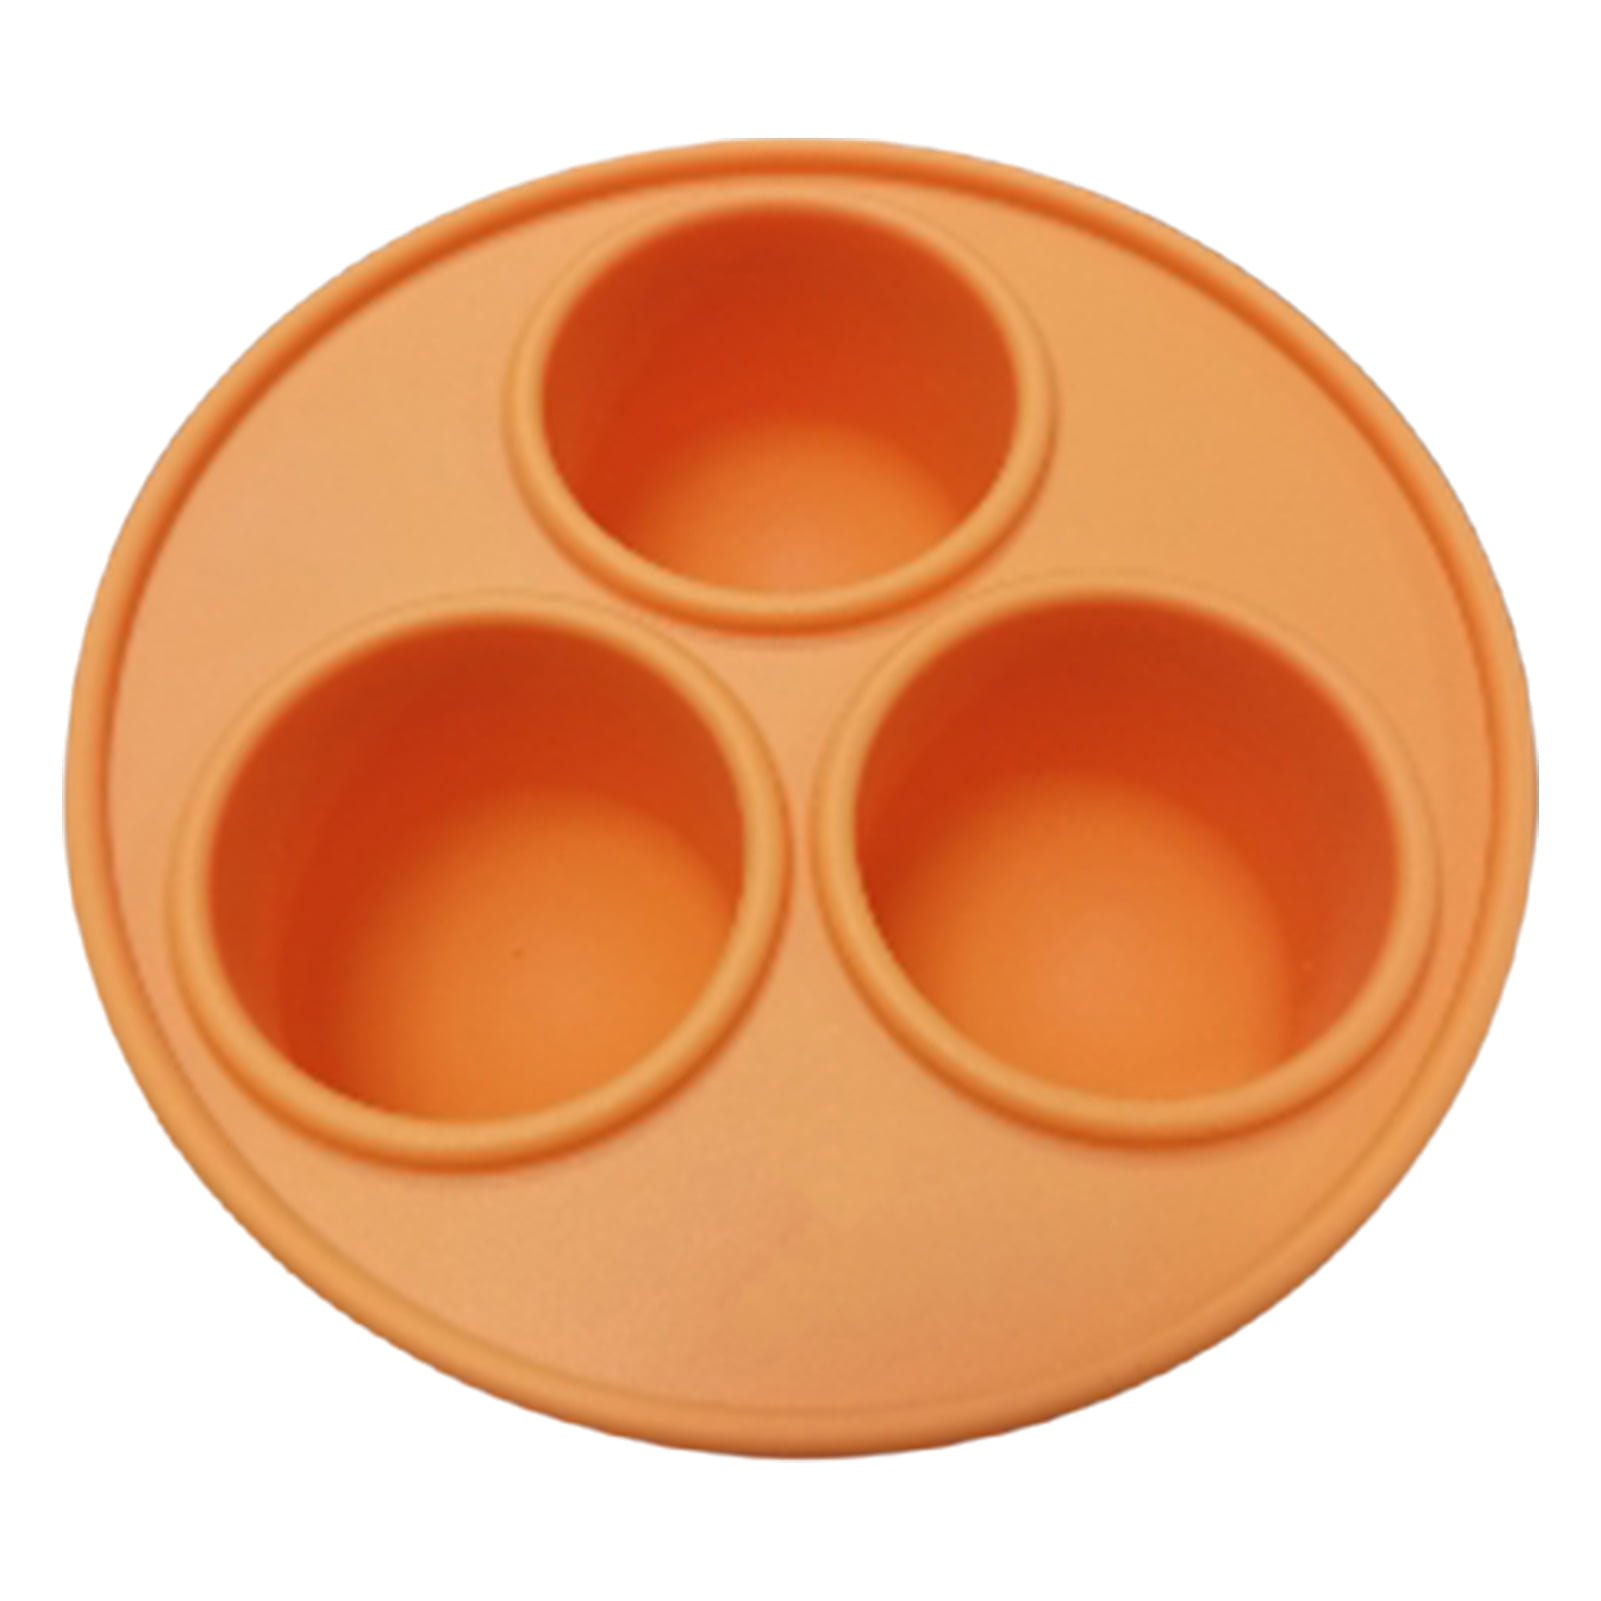 Waroomhouse Freezeable Dog Treat Molds Create Healthy Treats with This Easy-to-Clean Pet Treat Tray Silicone Dog Treat Molds for Homemade Freezable